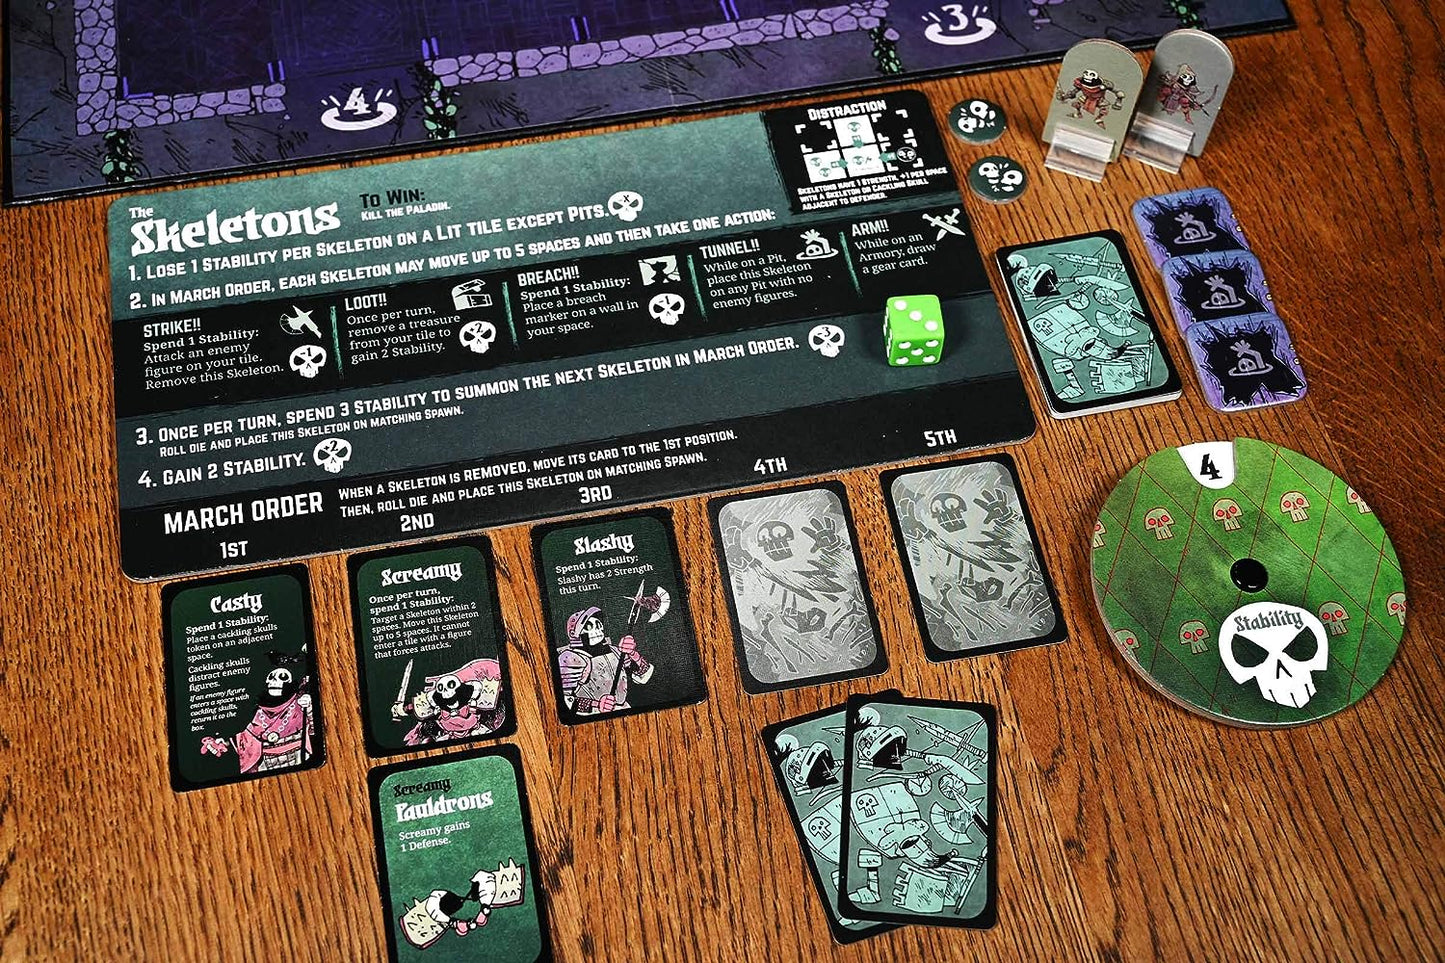 Vast: The Mysterious Manor (juego independiente)